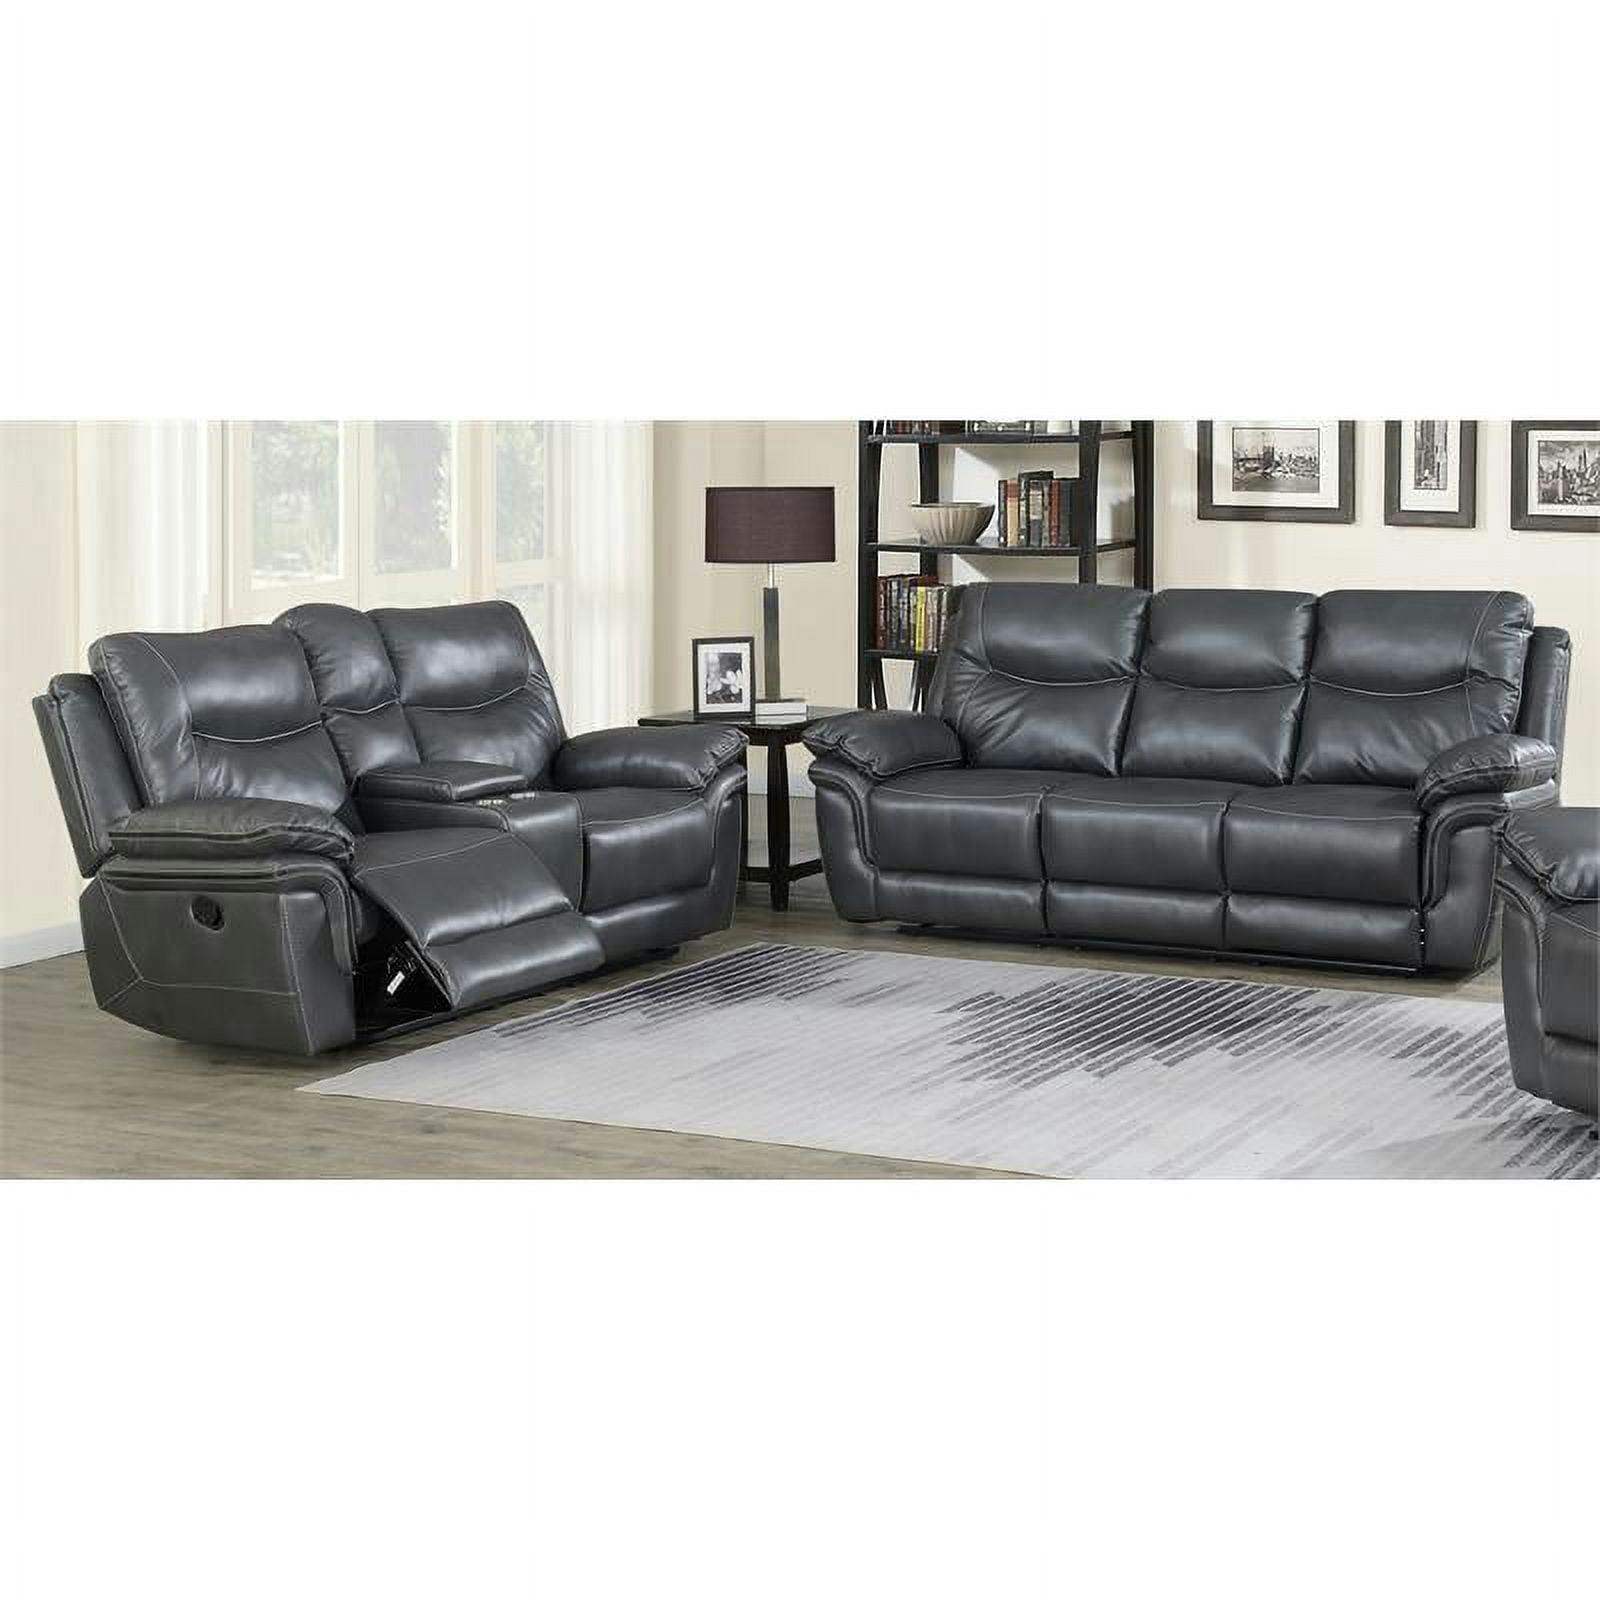 Isabella Grey Double Reclining Sofa and Loveseat Set with Storage Console